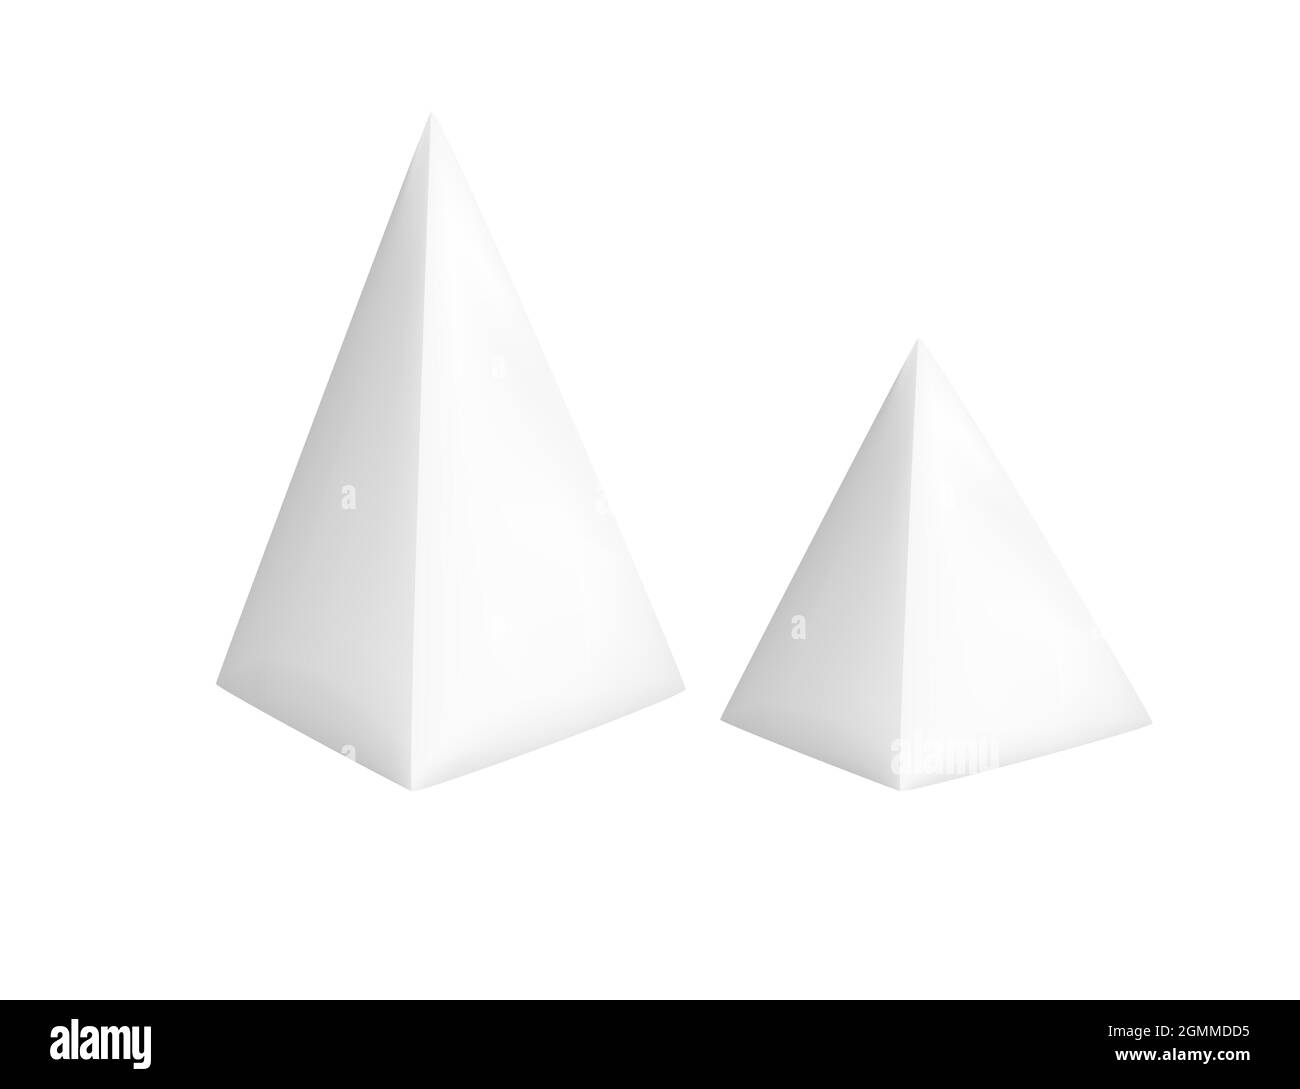 Matte white pyramid geometry figure for teaching in school vector illustration on white background Stock Vector